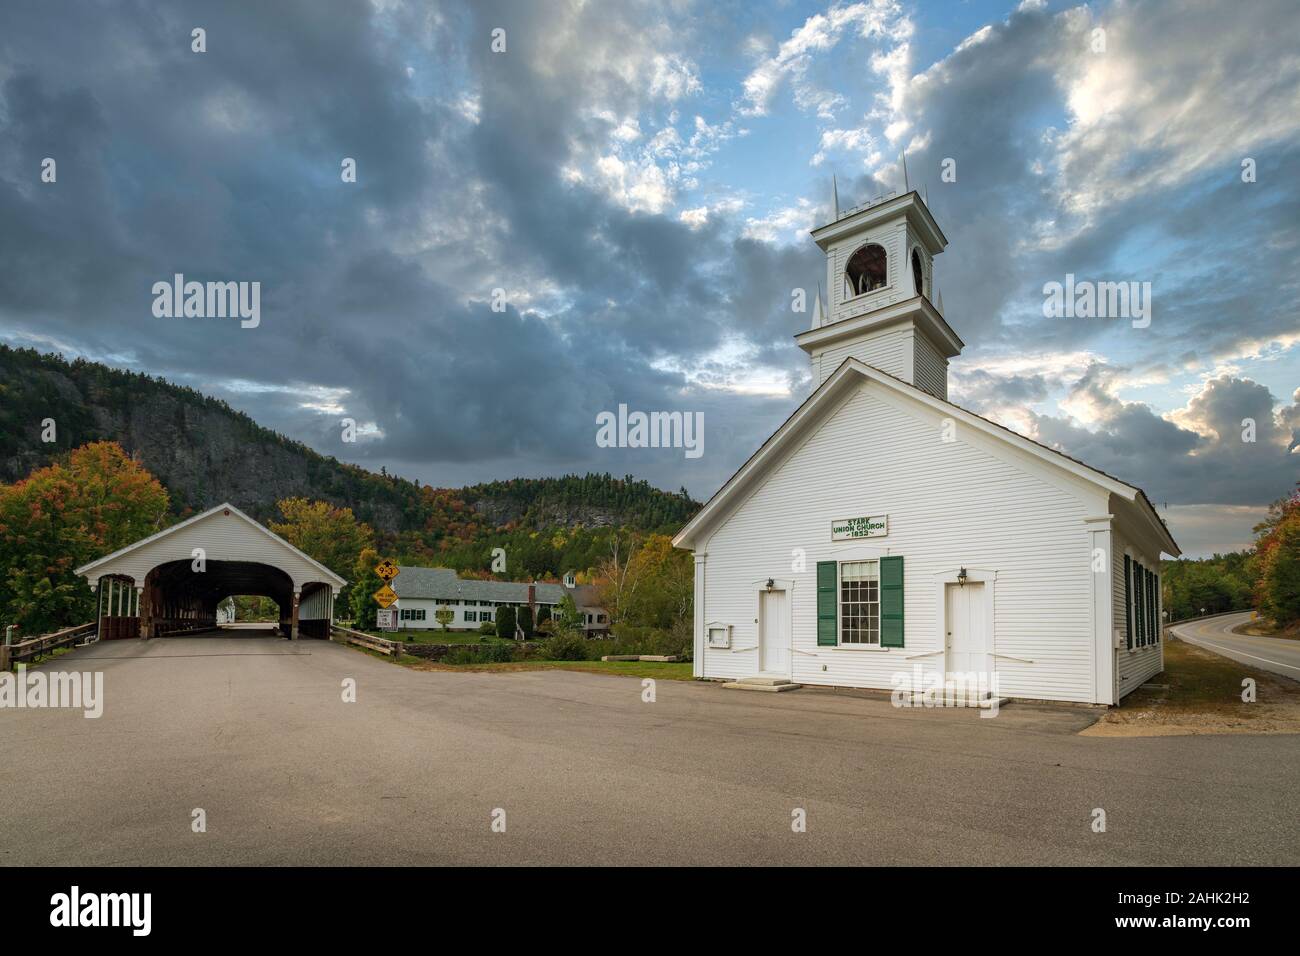 A small white wooden church building and covered bridge make for a quintessential image of a New England Village. Stock Photo